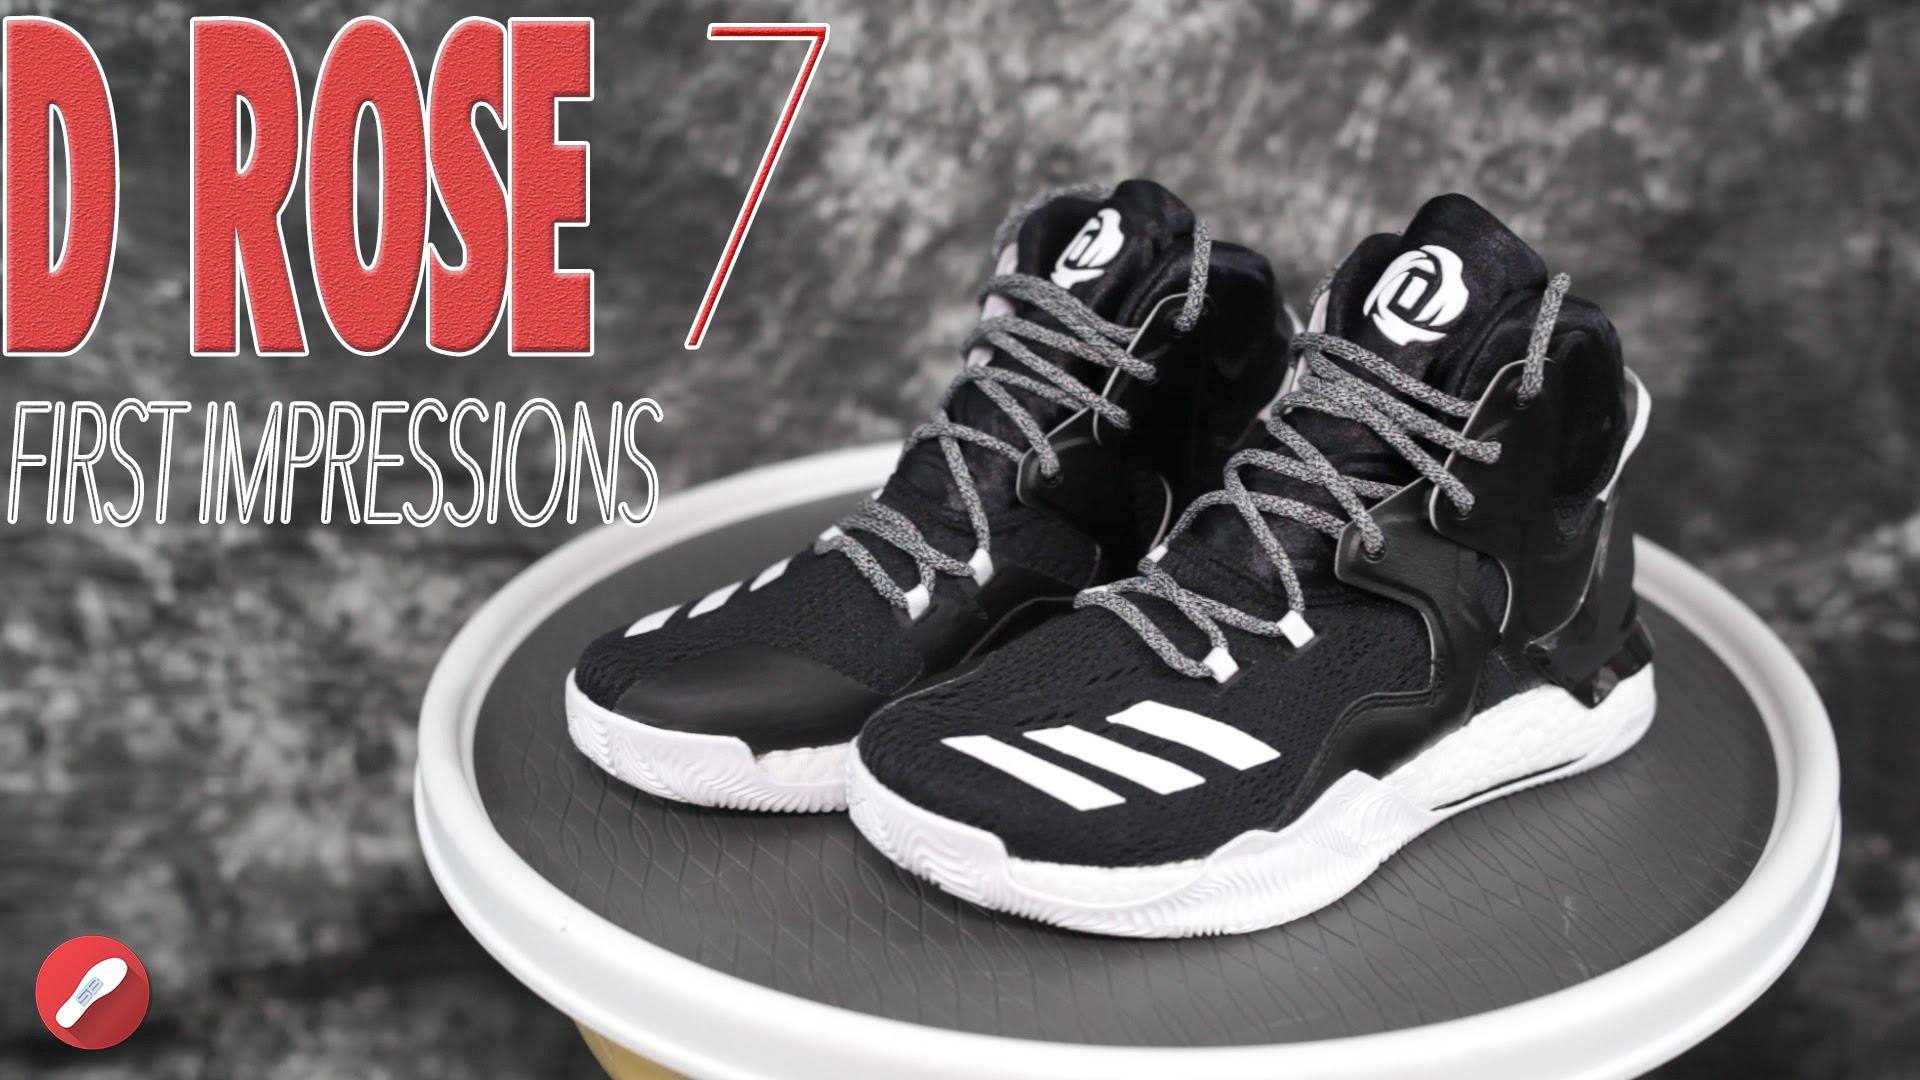 Adidas D Rose 7 First Impressions! - YouTube